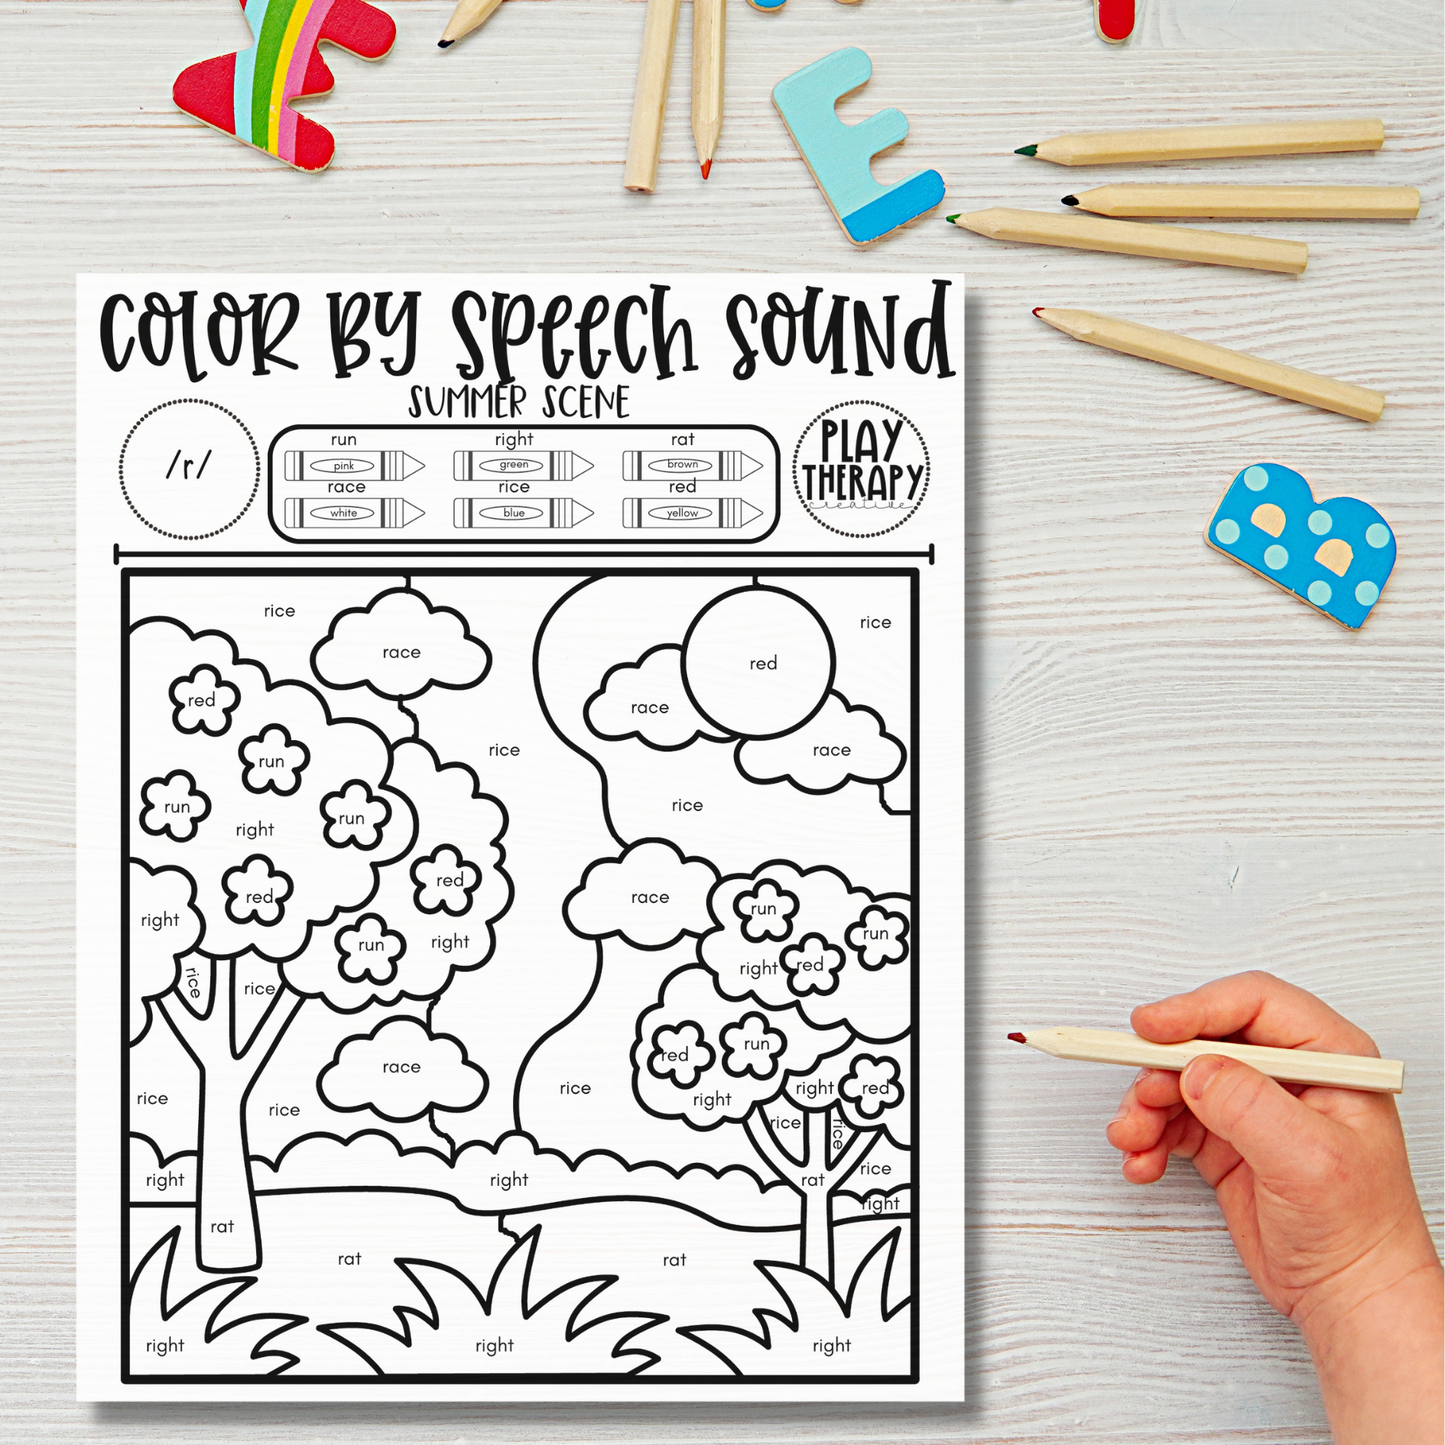 Pre-vocalic /r/ Sound Summer Themed Color-by-Speech-Sounds for Speech Therapy